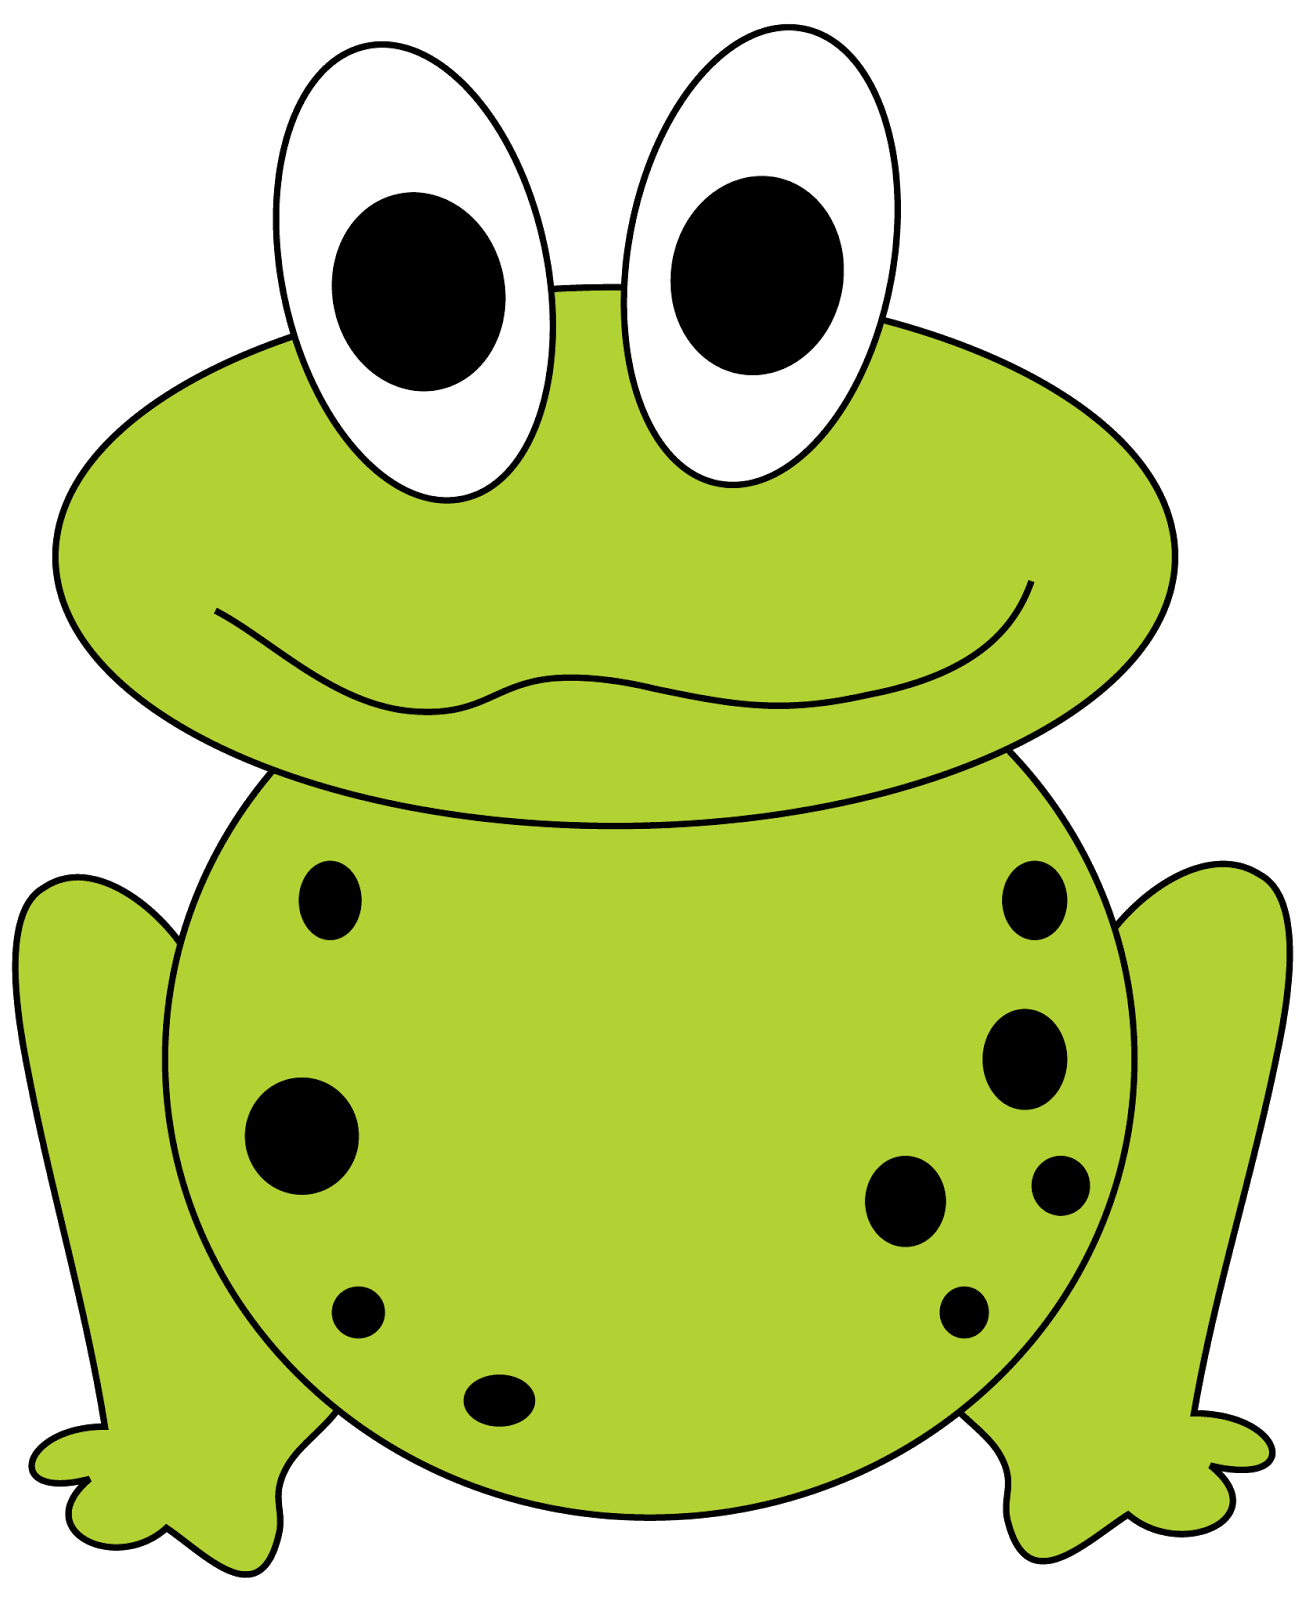 Cute hopping frog clipart free clipart images.